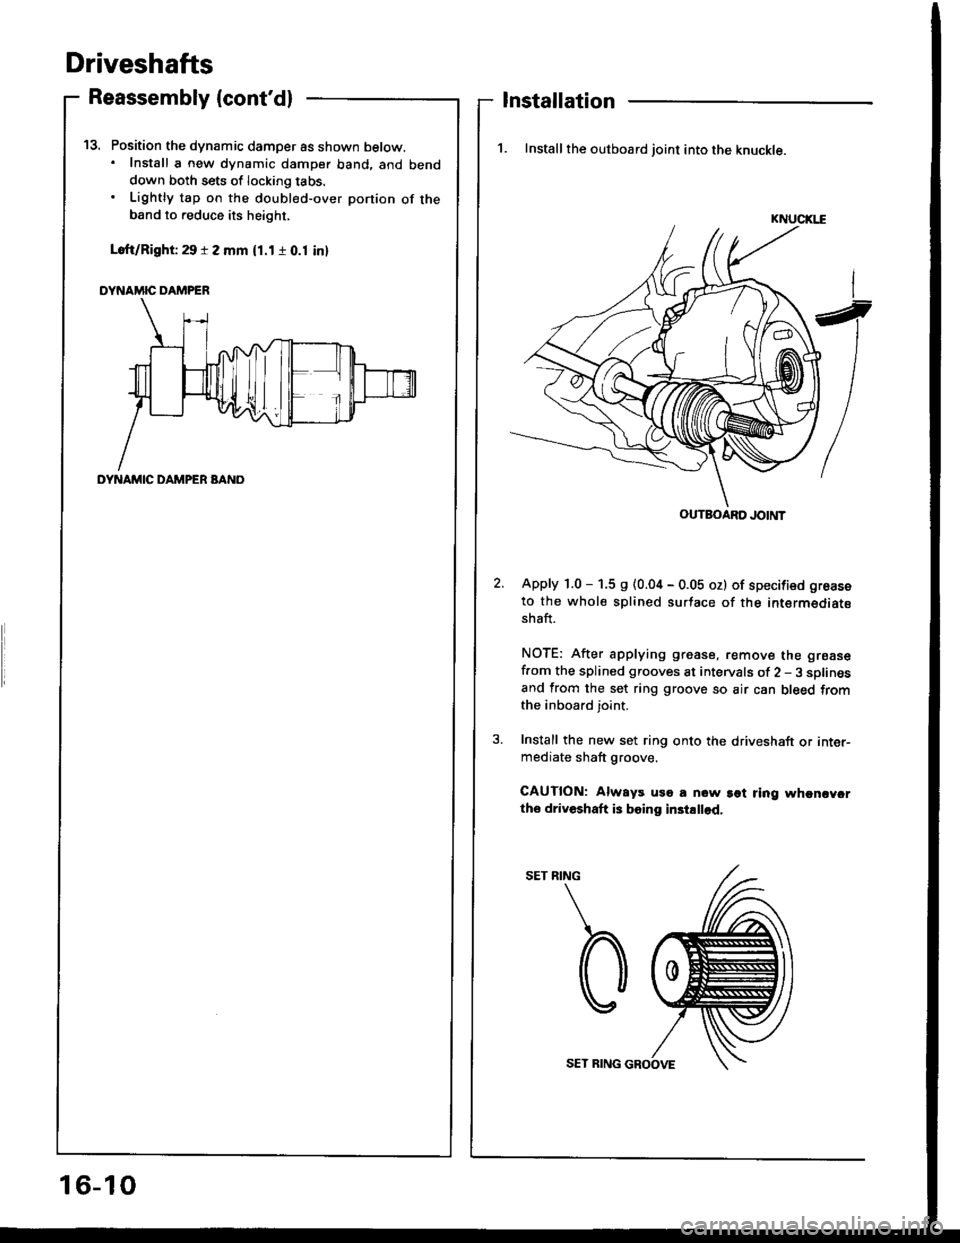 HONDA INTEGRA 1994 4.G User Guide Driveshafts
Position the dynamic damper as shown below.. Install a new dynamic damper band. and benddown both sets of locking tabs.
Lightly tap on the doubl€d-over ponion of theband to reduce its he